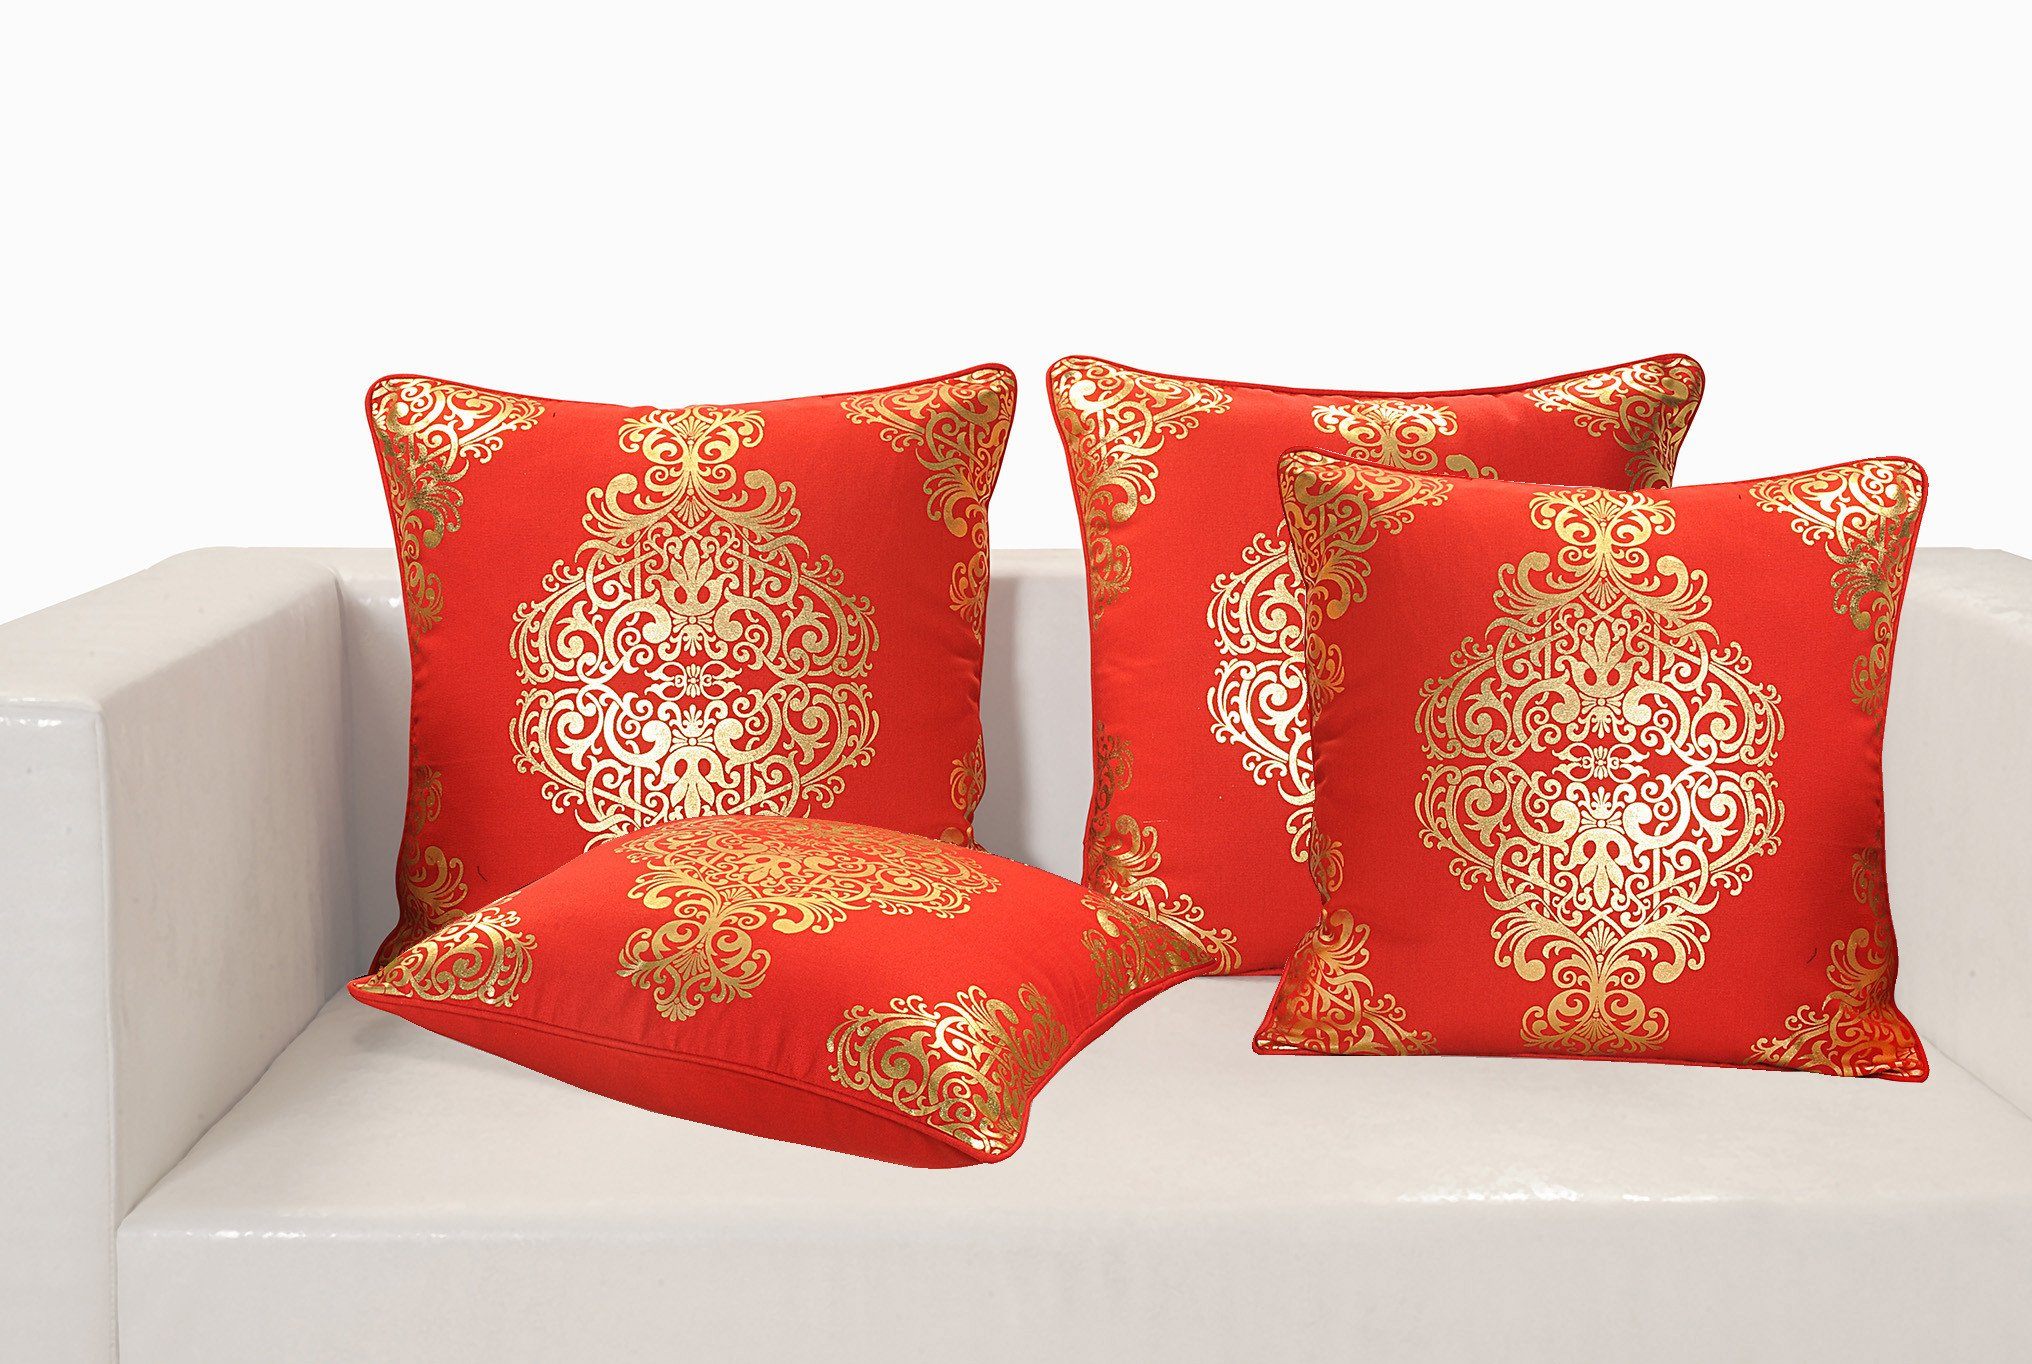 GOLD AND RED CUSHION COVER - Flickdeal.co.nz